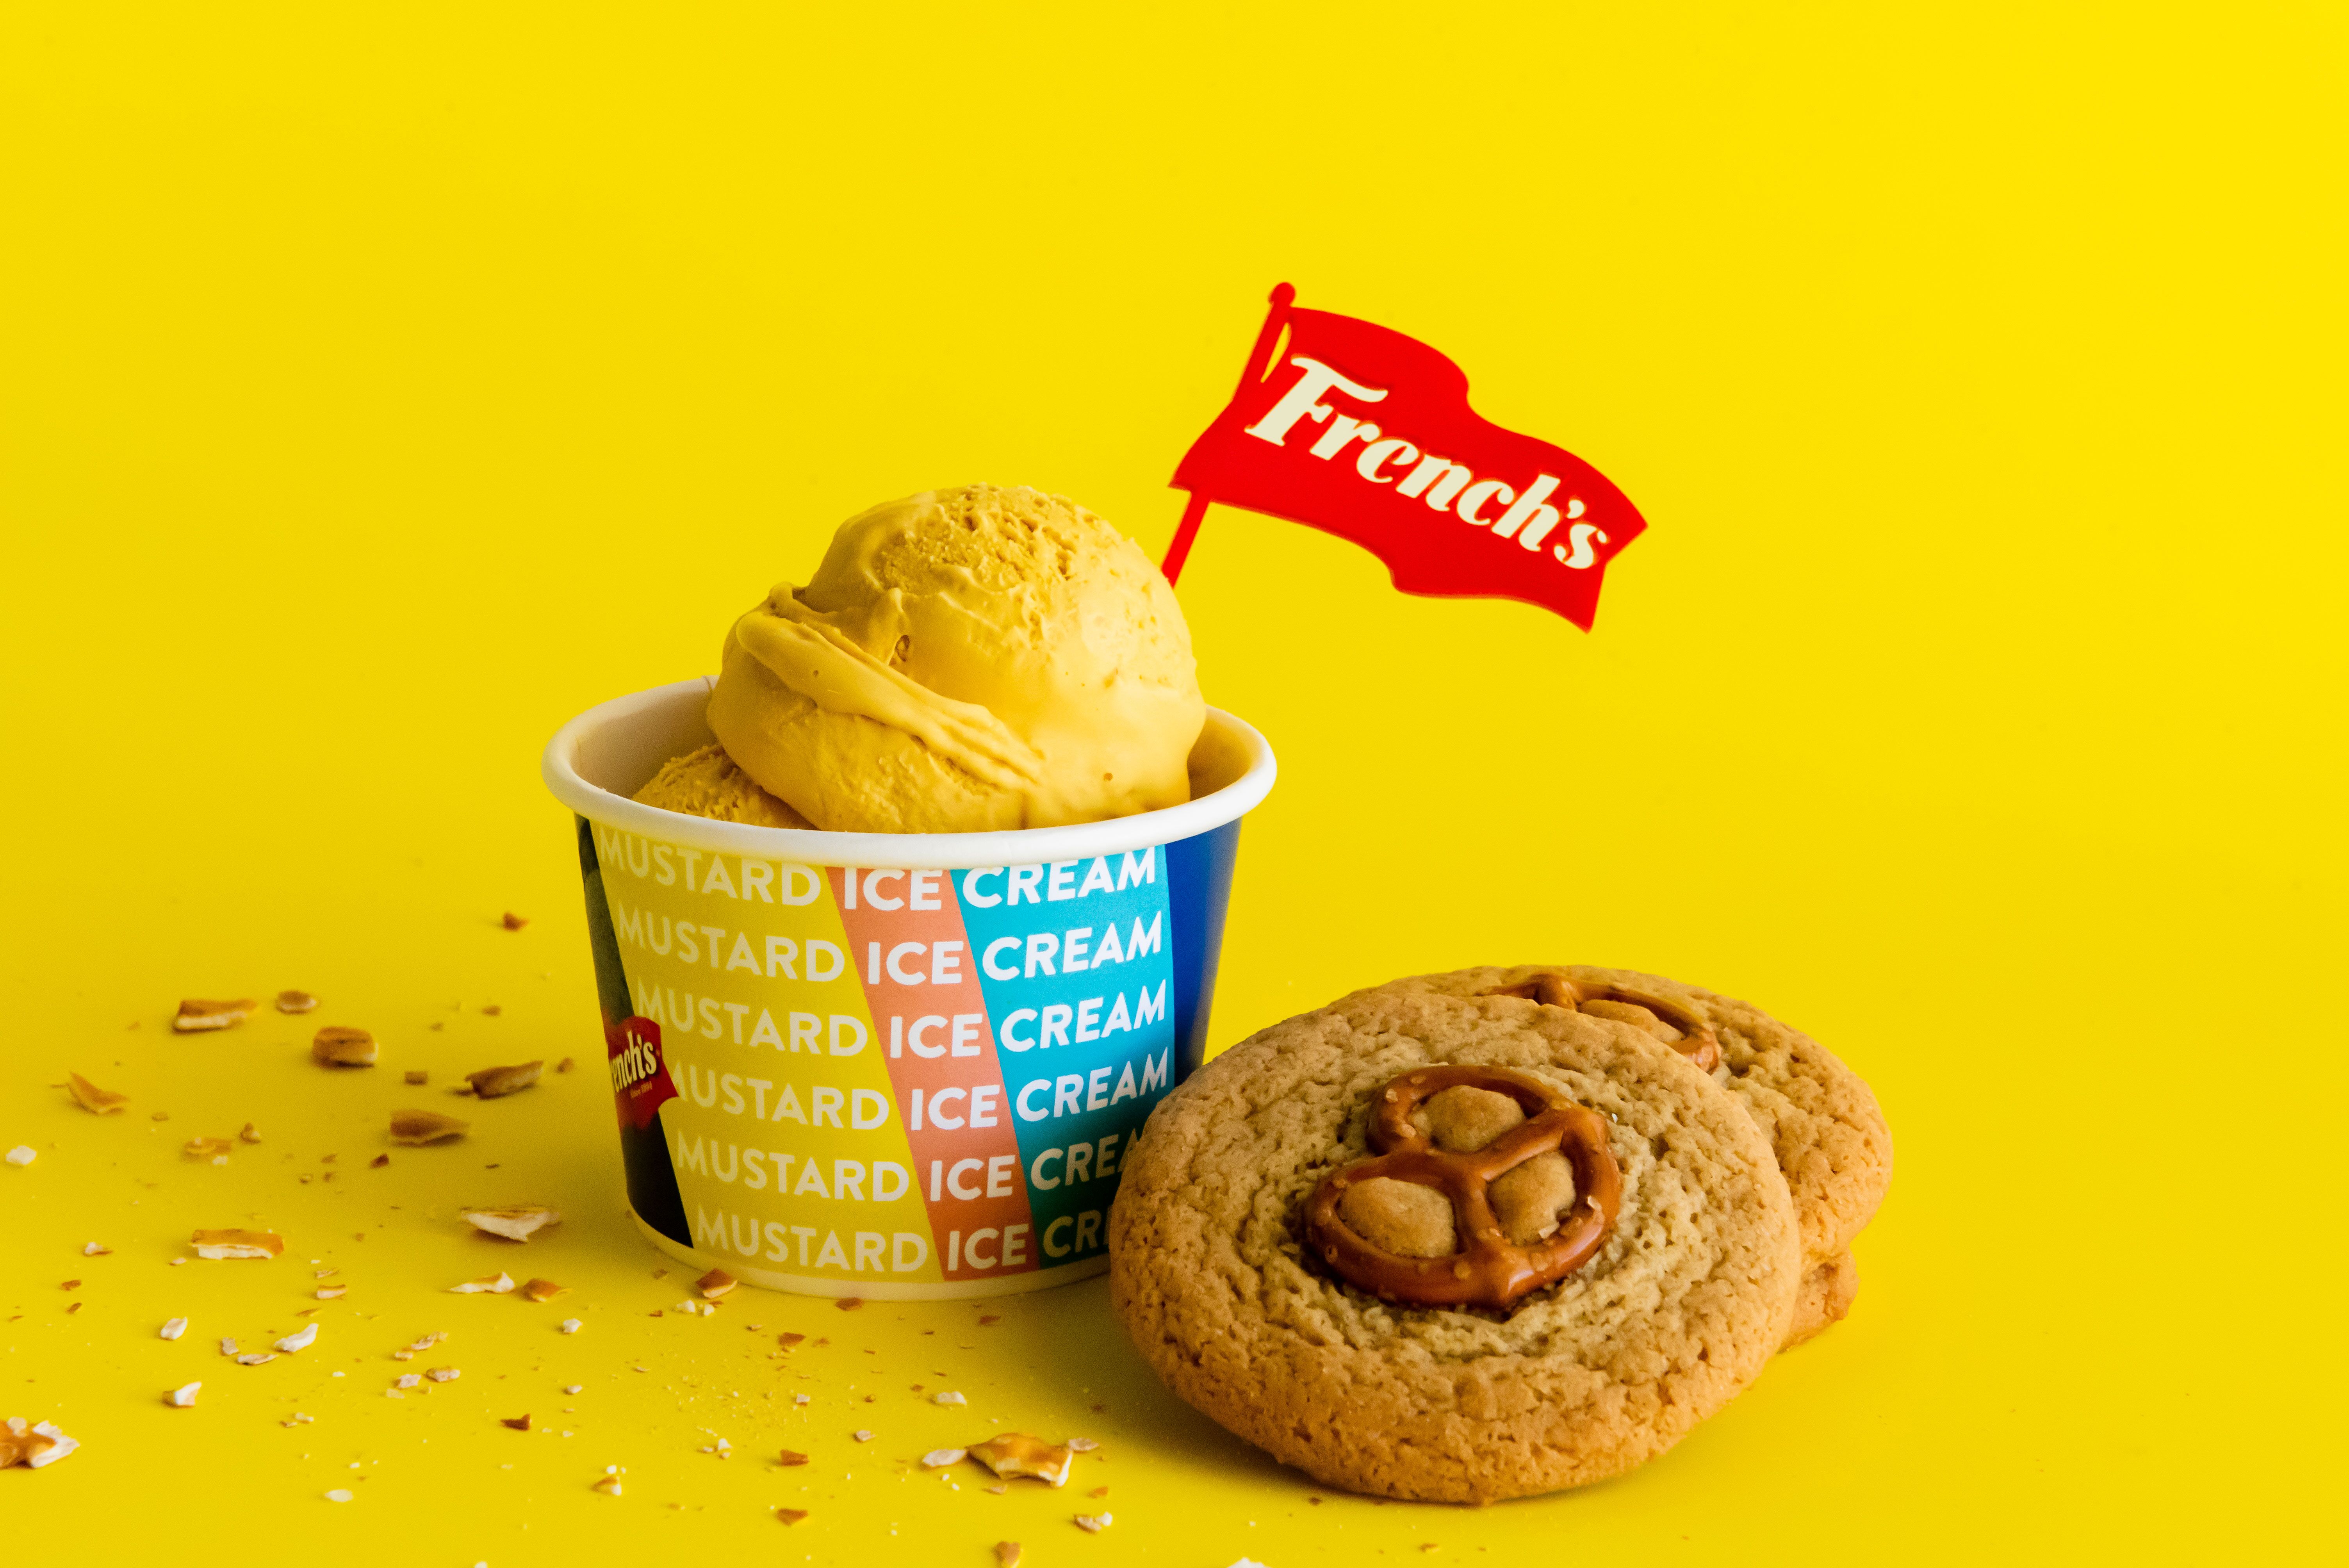 Mustard Ice Cream Is A Thing & We’re Weirdly Into It